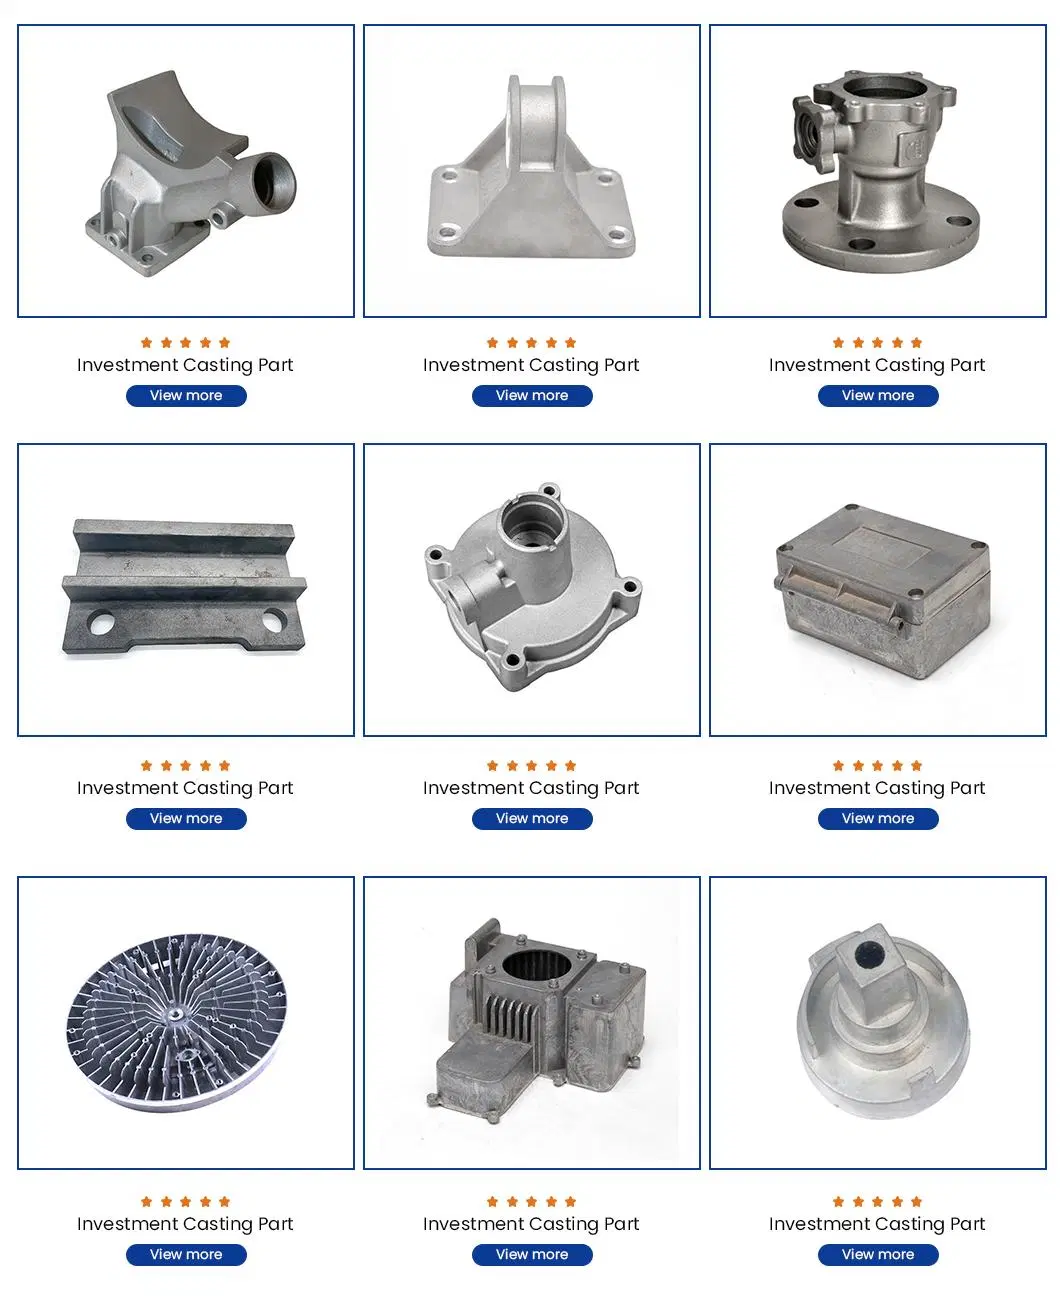 QS Machinery Leading Investment Casting Companies OEM Leading Investment Casting Services China Gate Valve Cast Steel